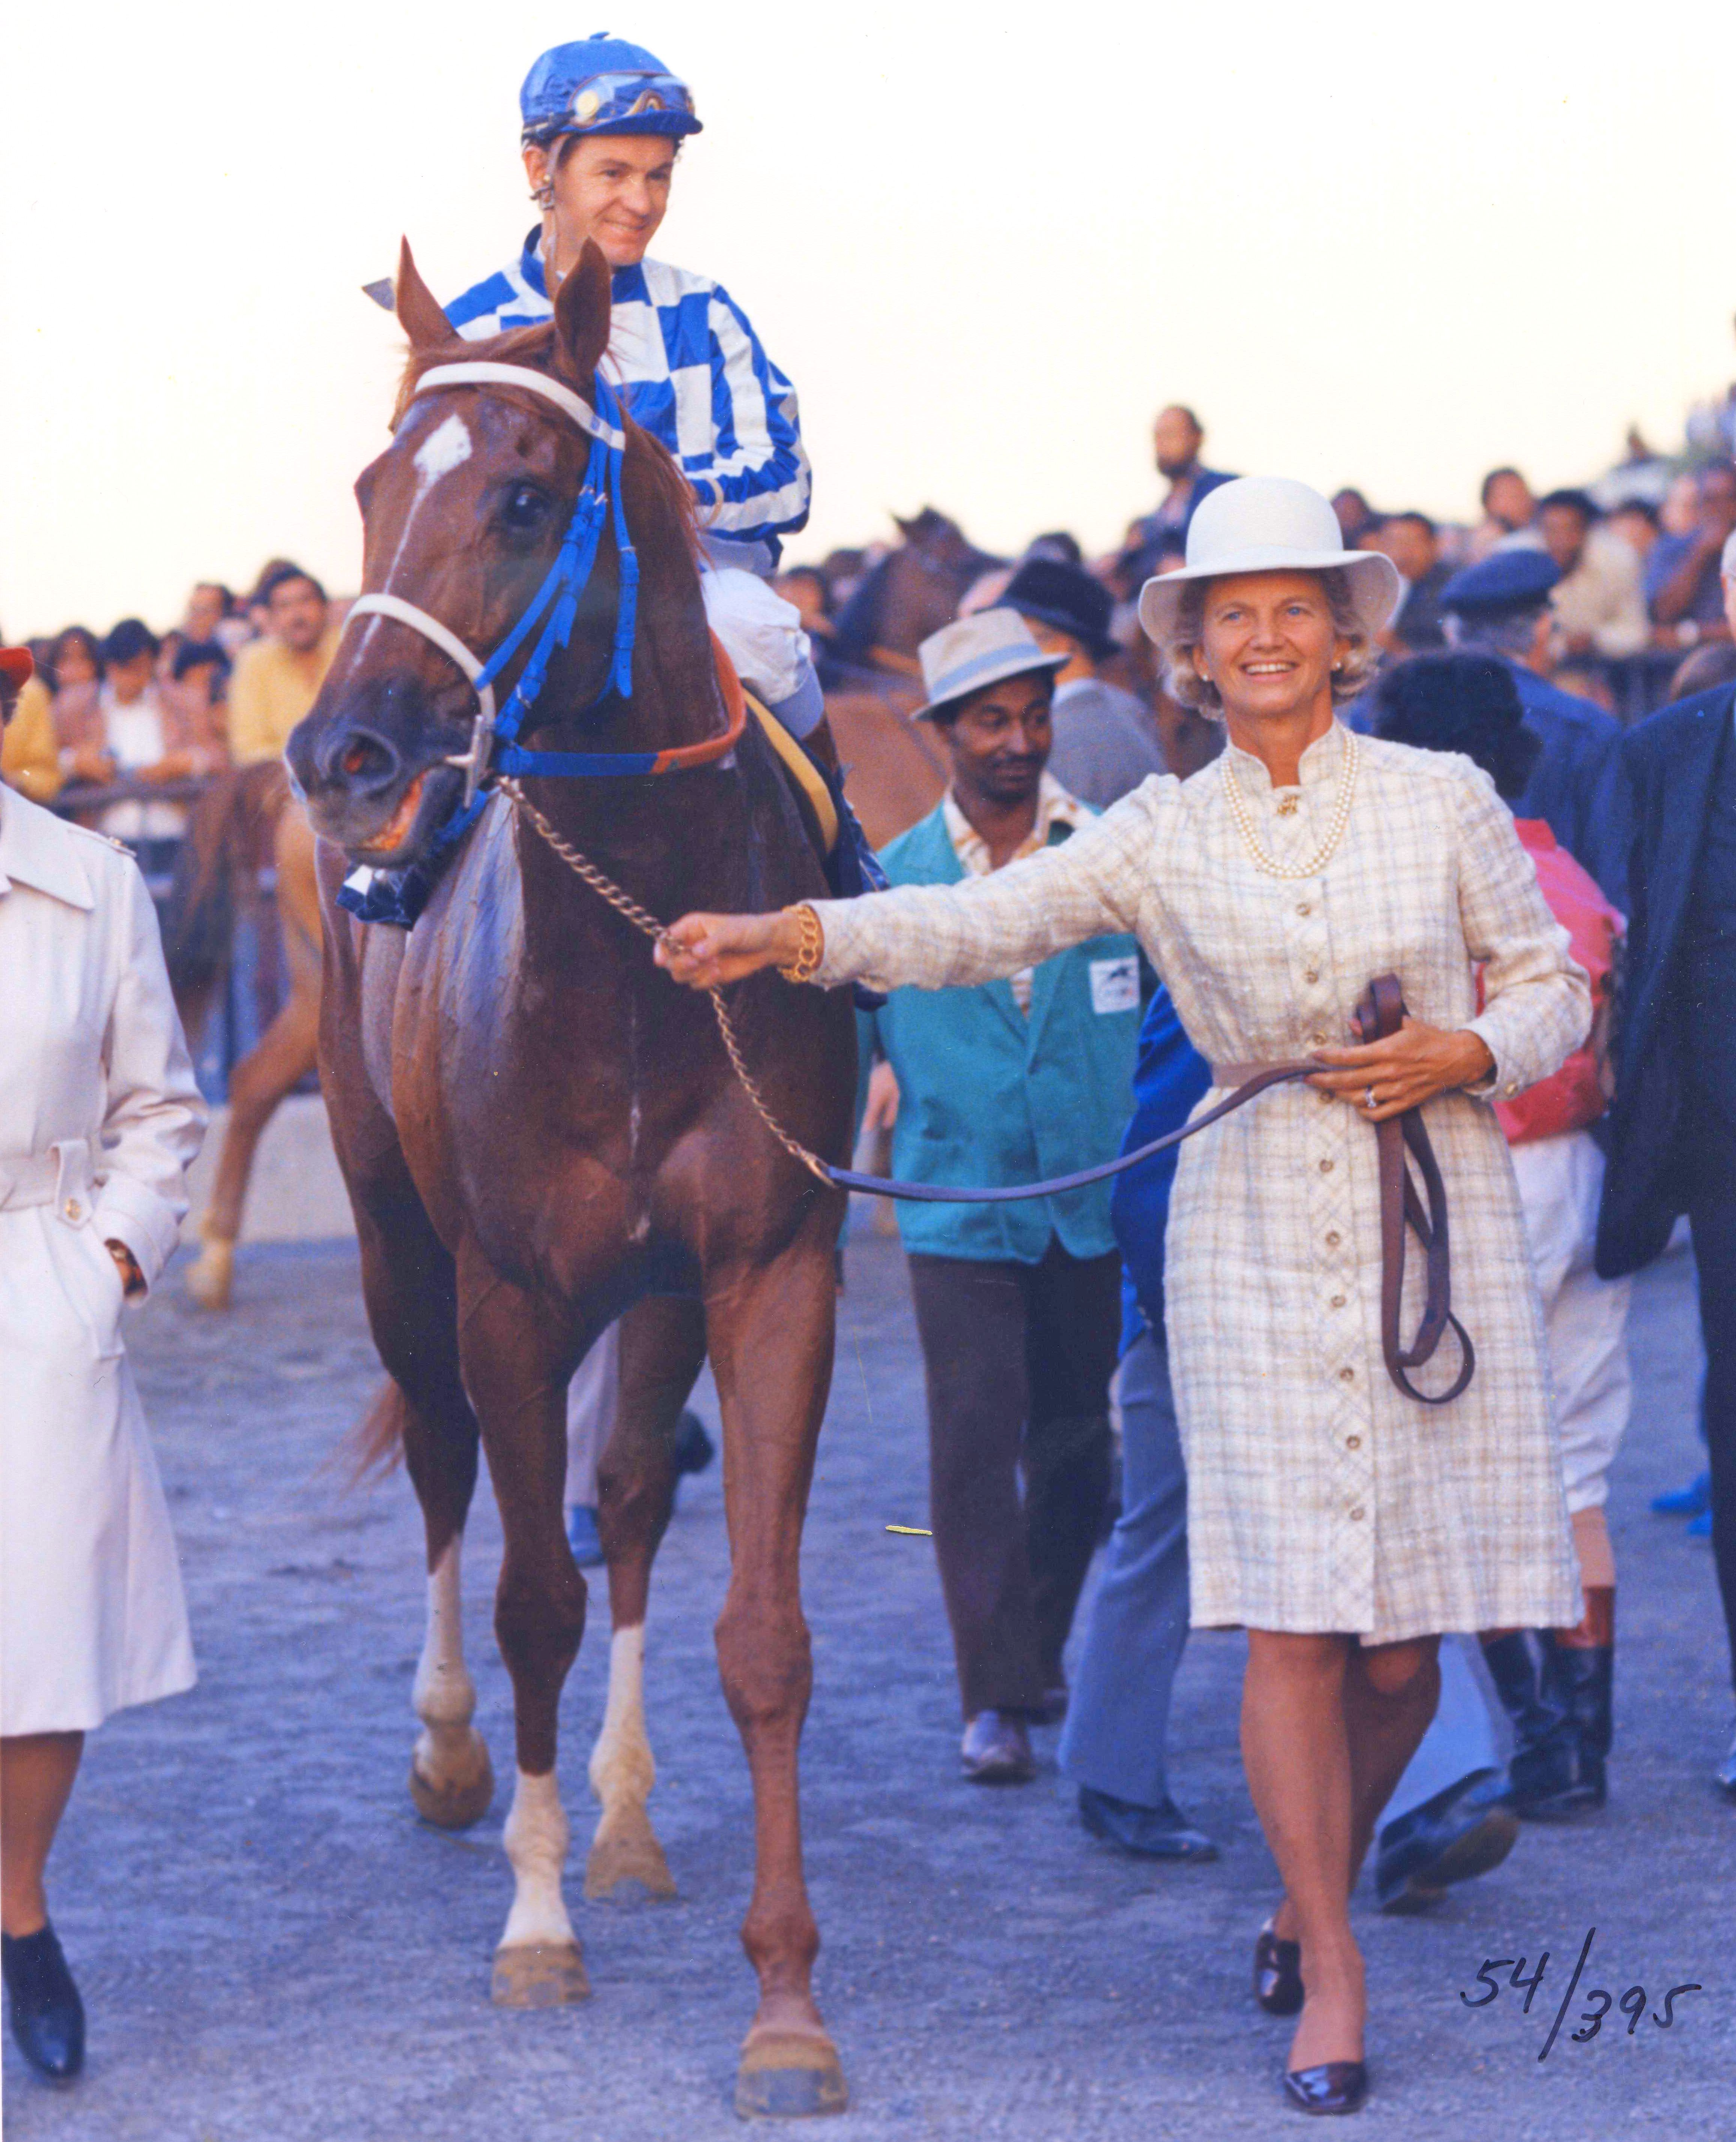 Penny Chenery leads Secretariat (Turcotte up) into the winner's circle after winning the Man o' War Stakes at Aqueduct, October 1973 (NYRA/Bob Coglianese/Museum Collection)